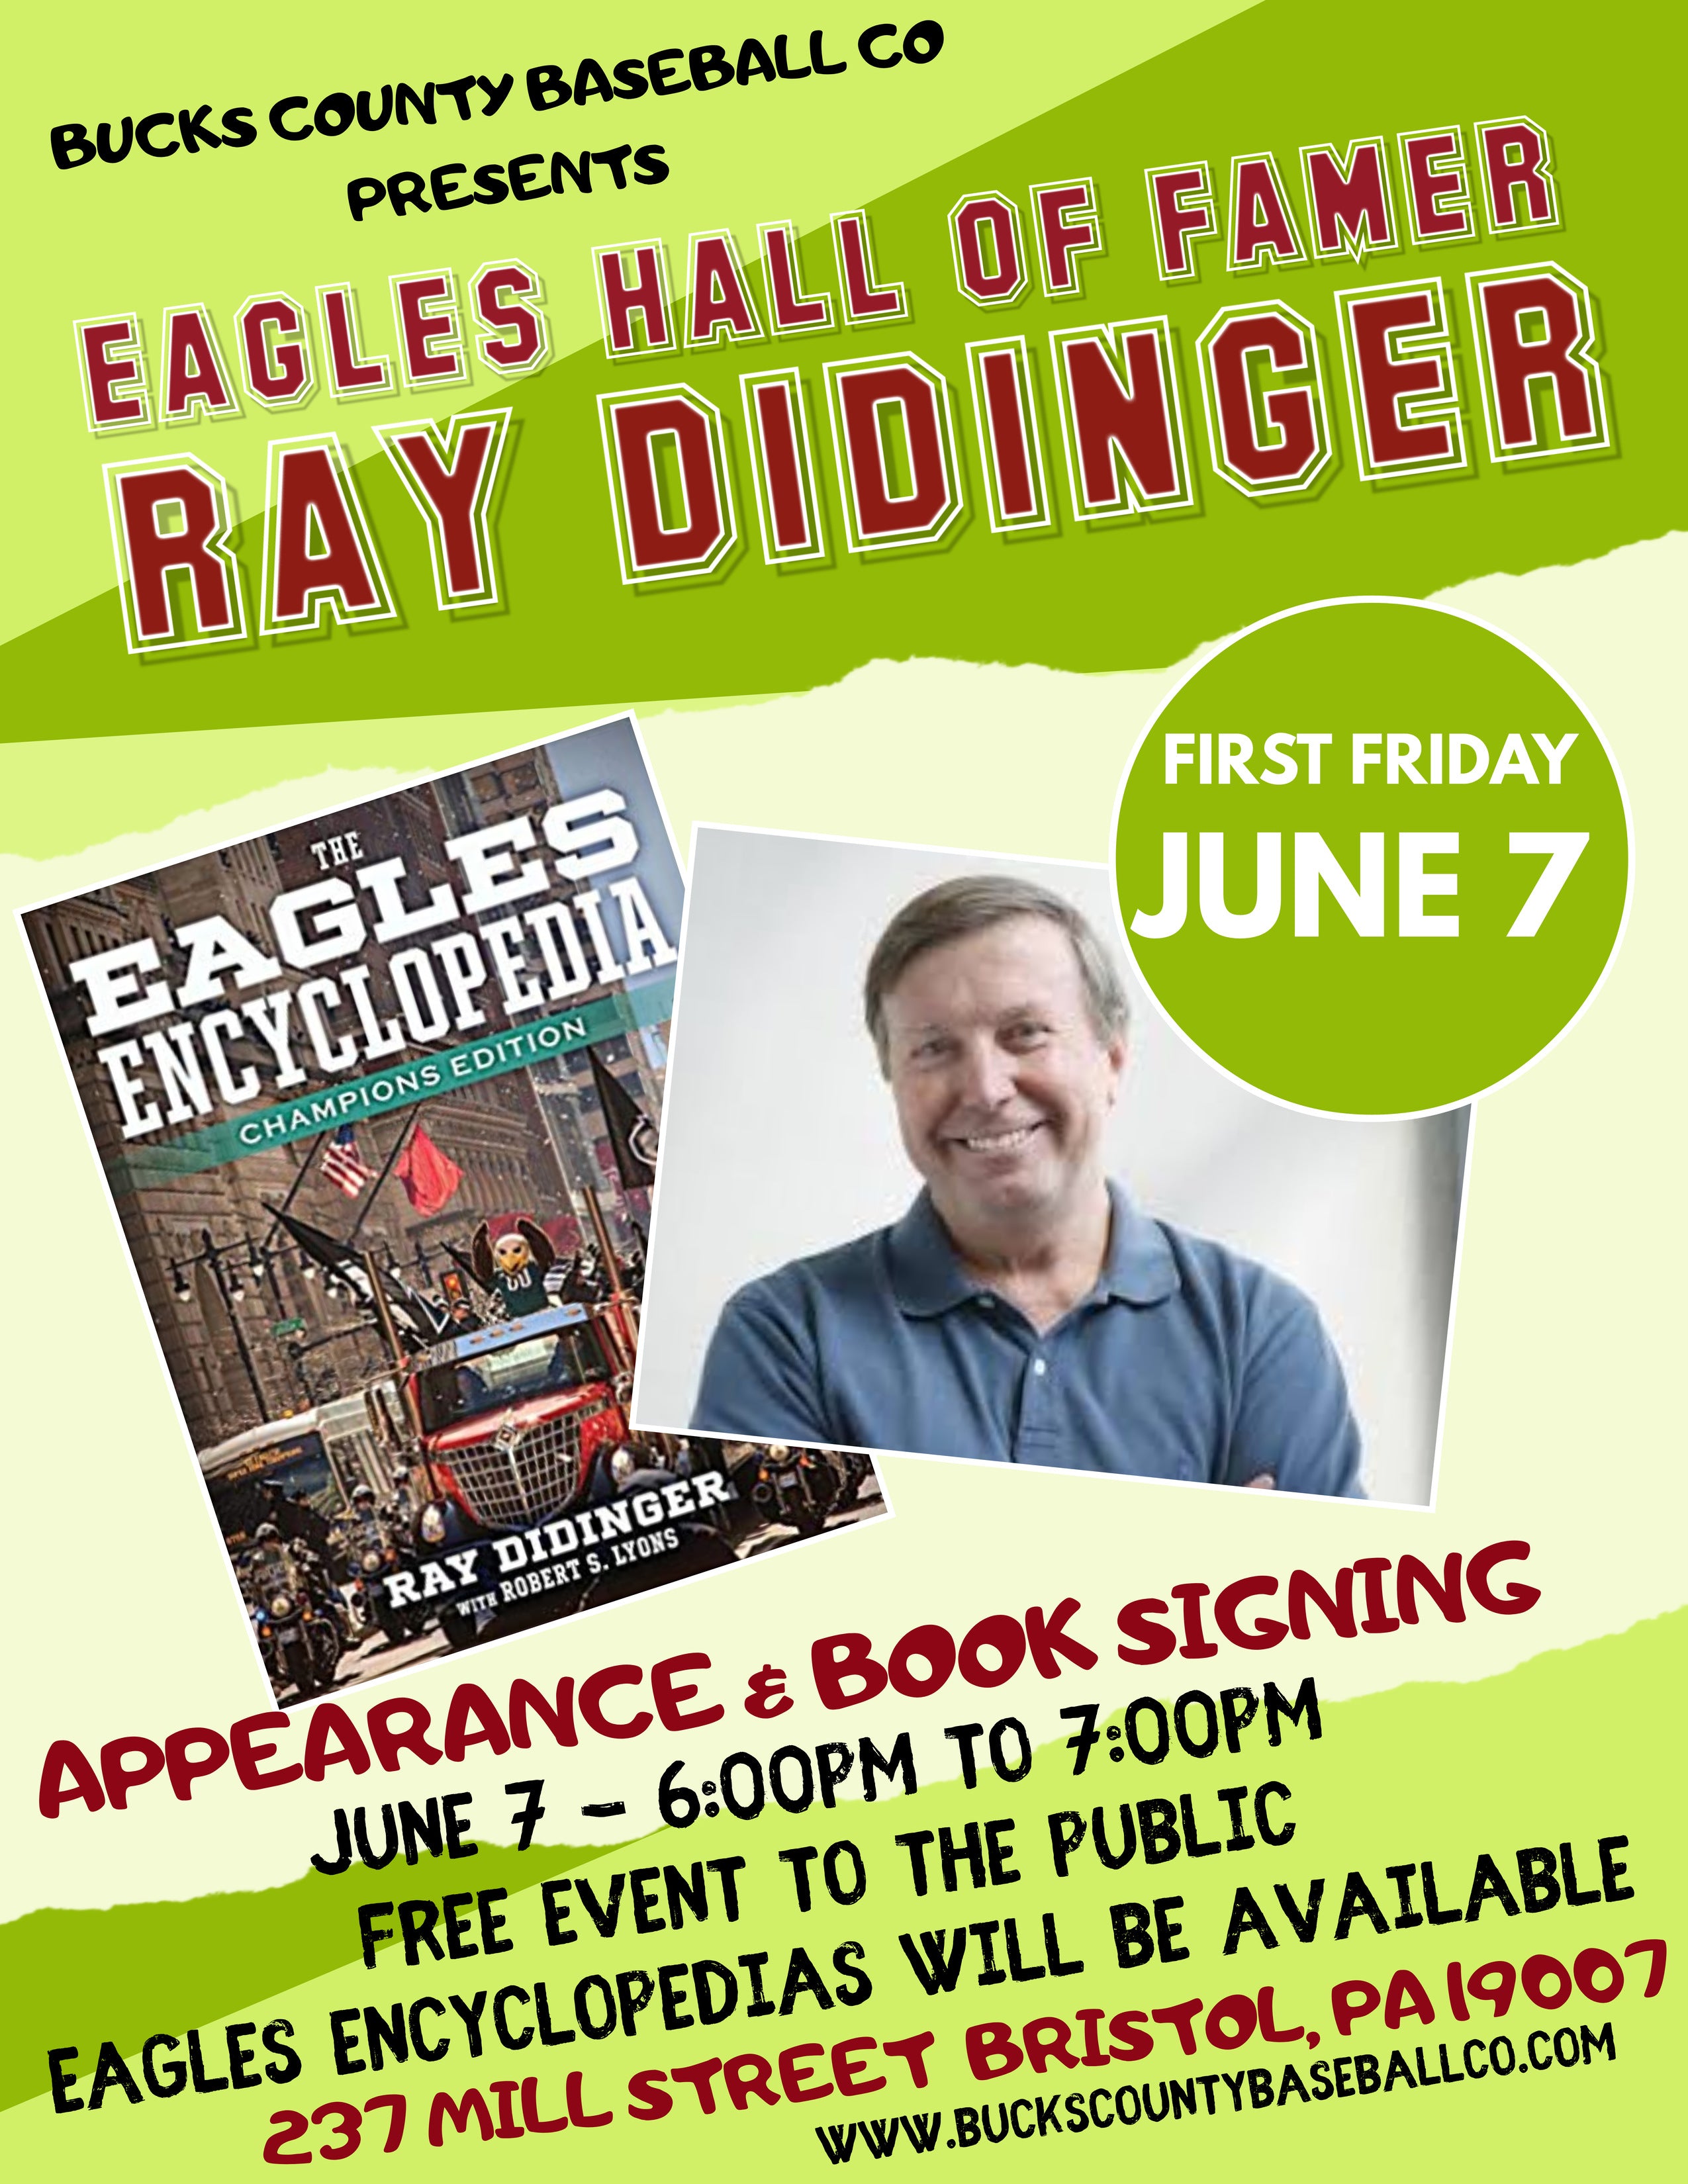 Ray Didinger Appearance & Book Signing on June 7